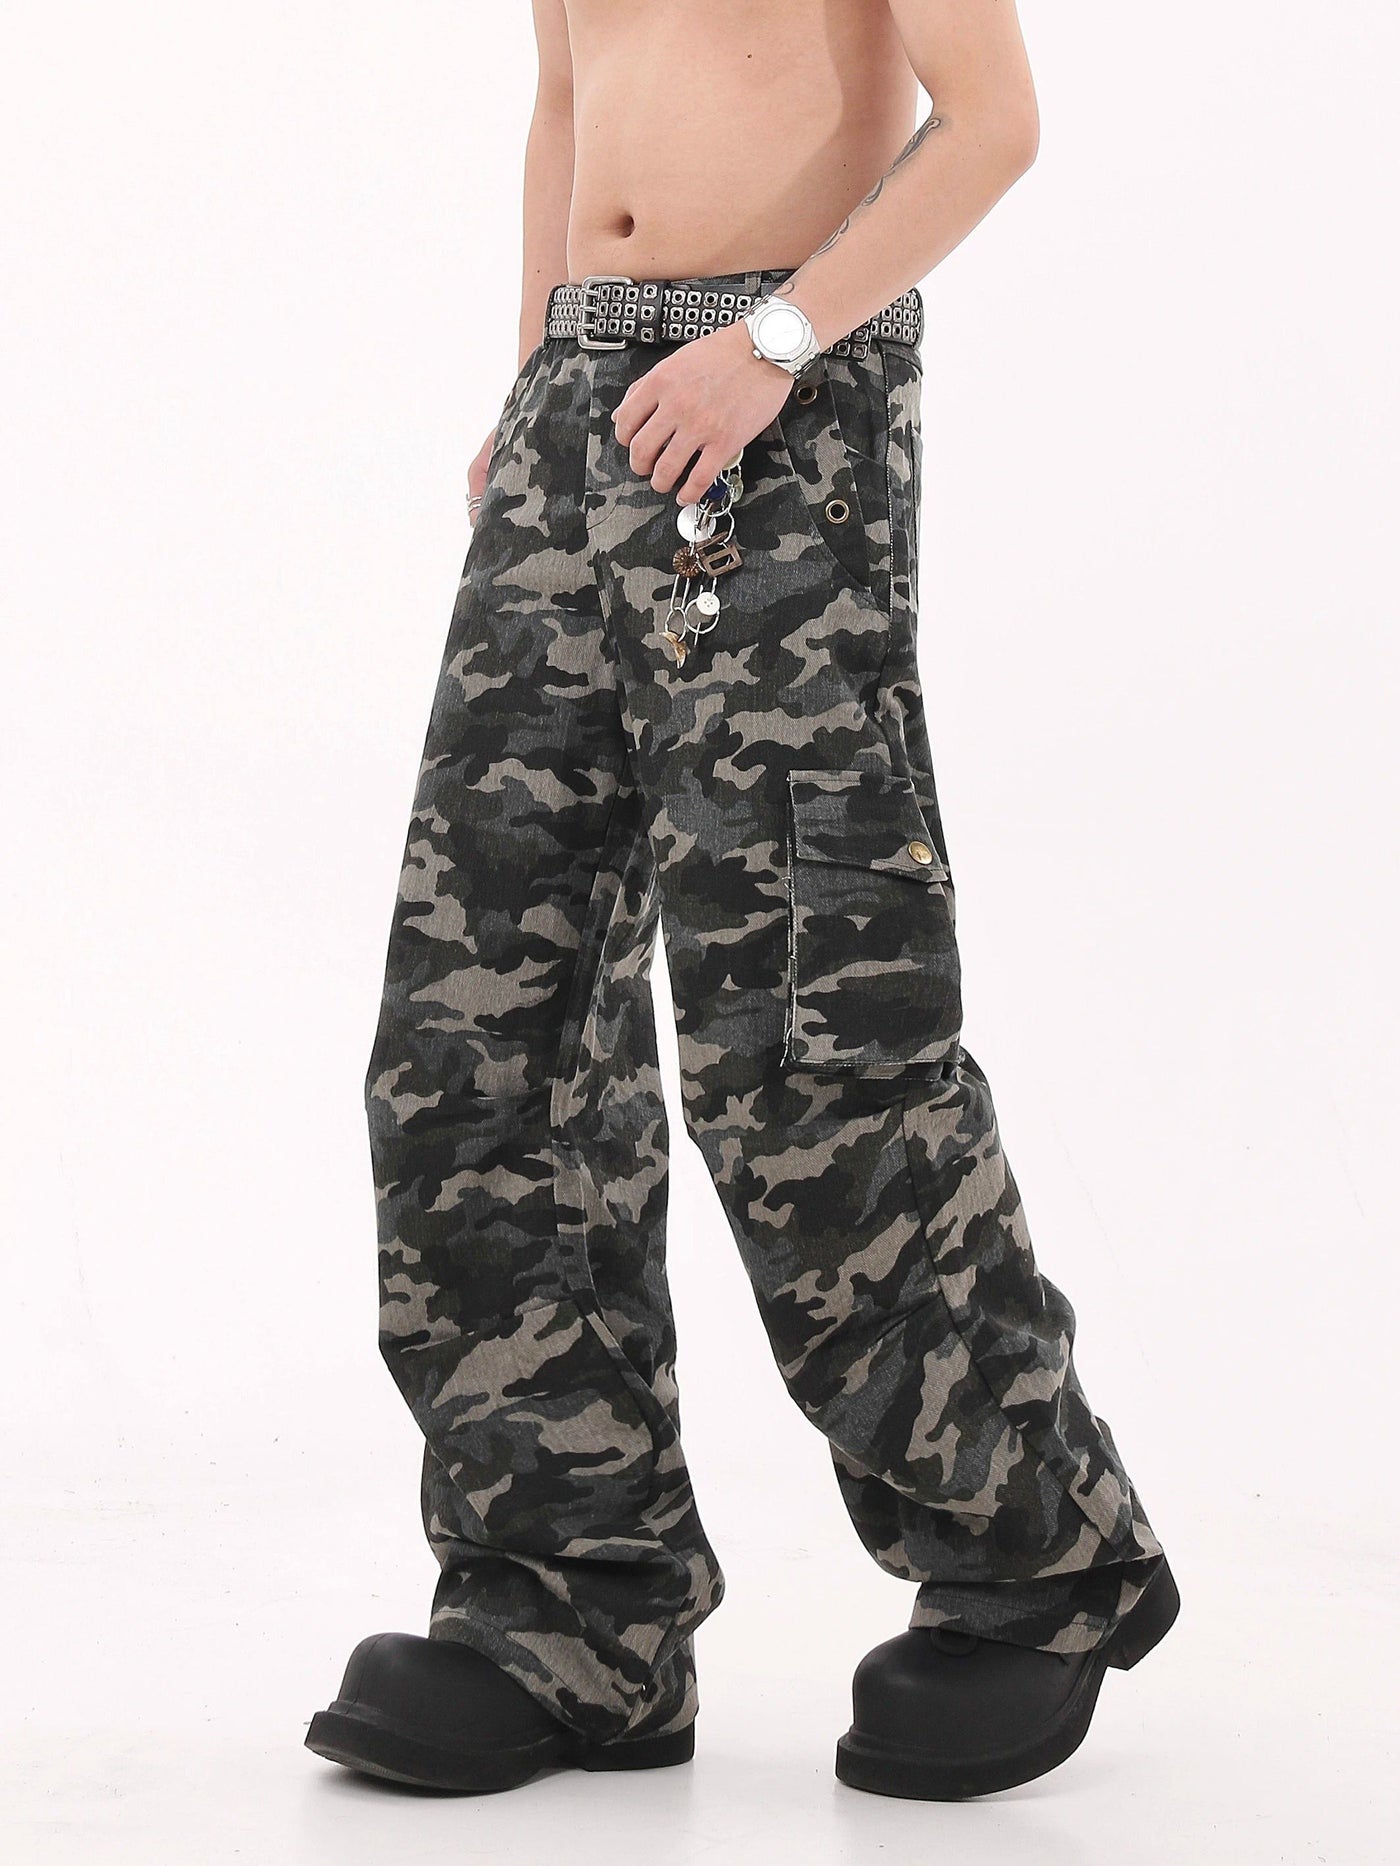 Camo Print Pleated Straight Cargo Pants Korean Street Fashion Pants By Blacklists Shop Online at OH Vault